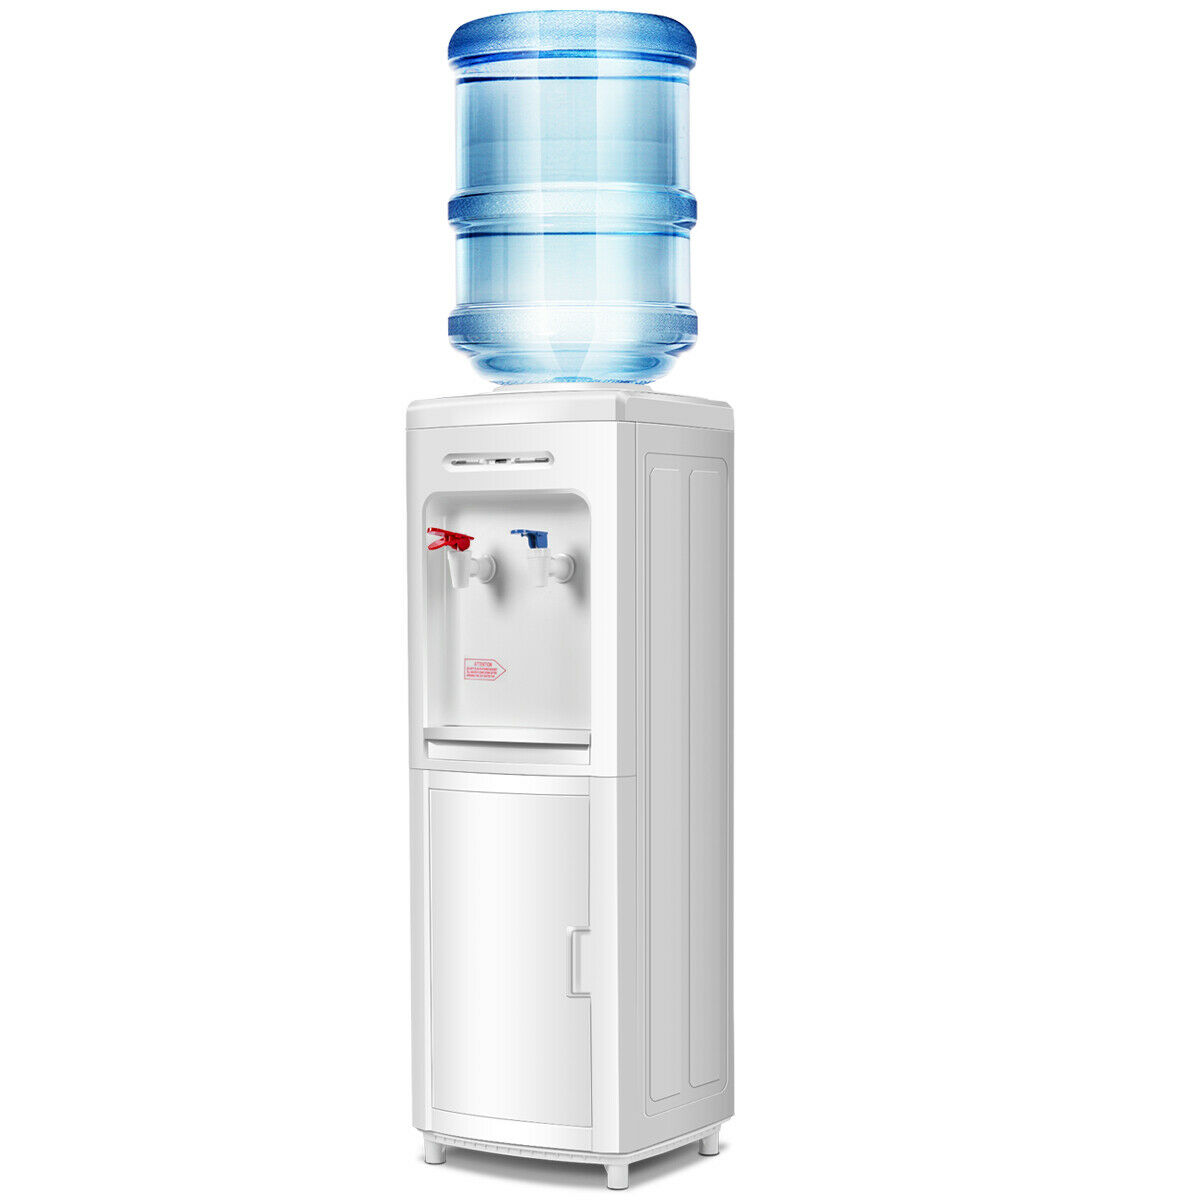 Beat the Heat: Buy the Panasonic NF-28M Hot and Cold Water Dispenser Today!